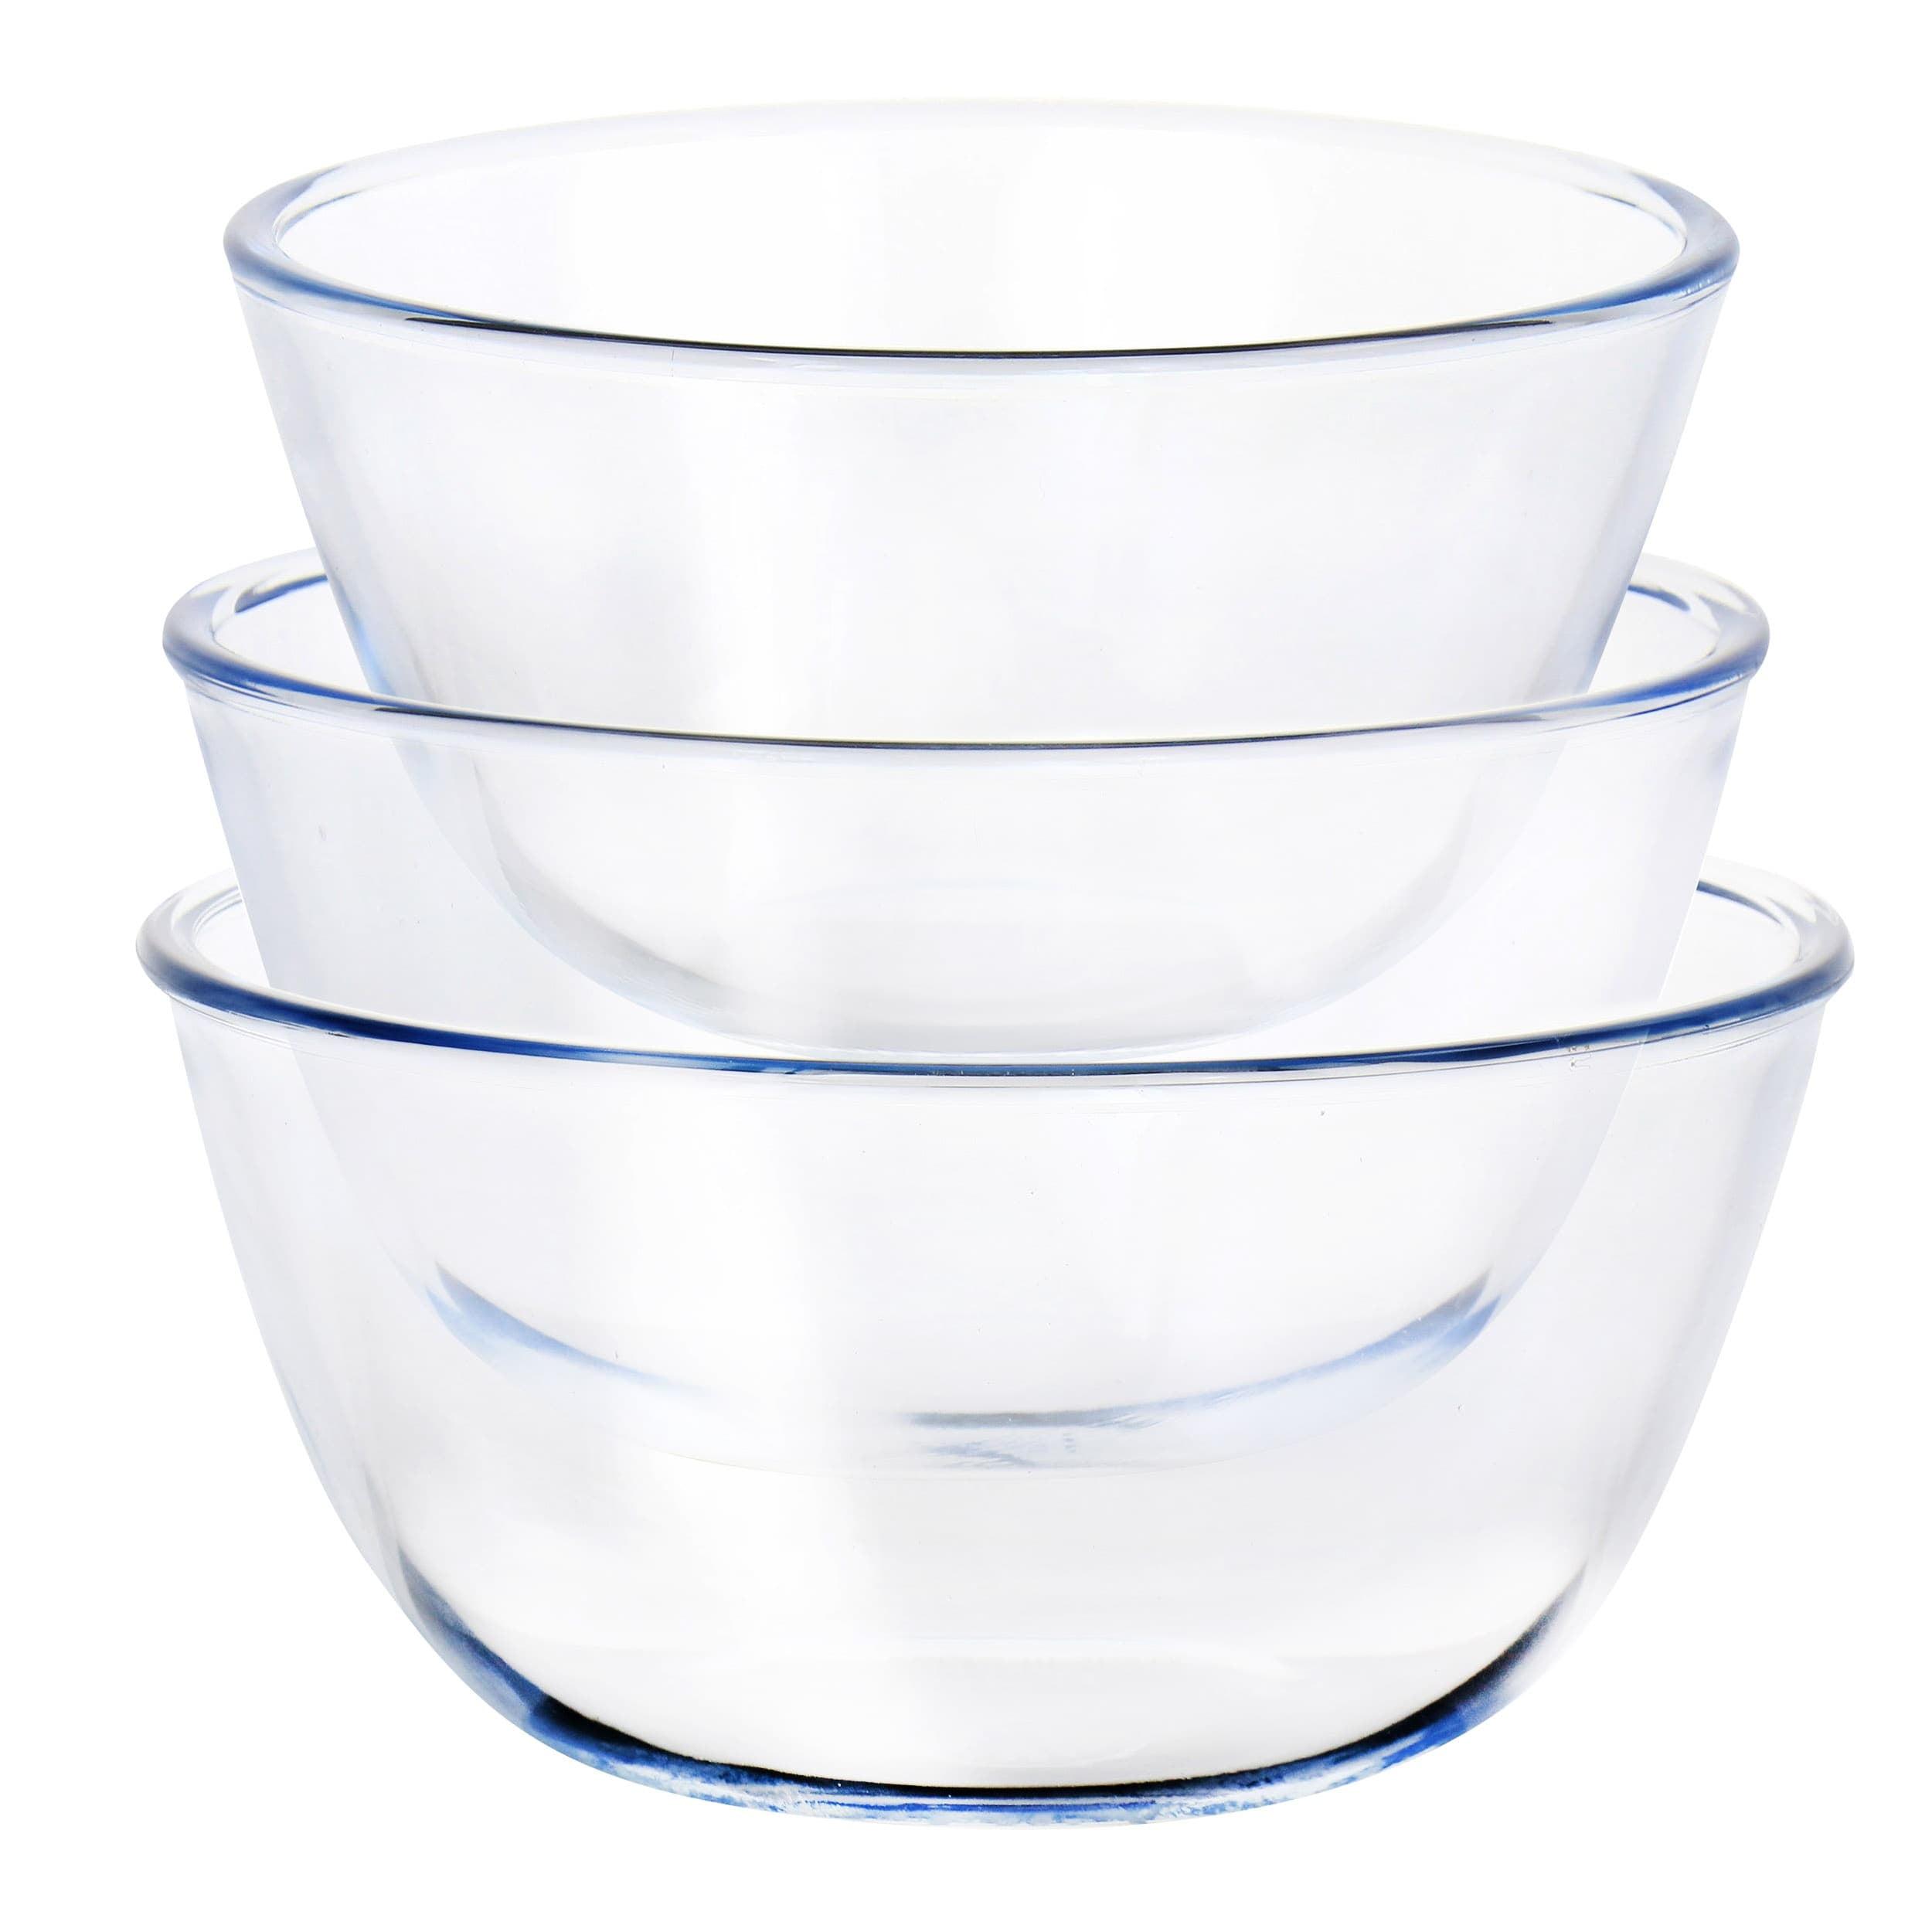 Martha Stewart Collection CLOSEOUT! Set of 6 Melamine Mixing Bowls